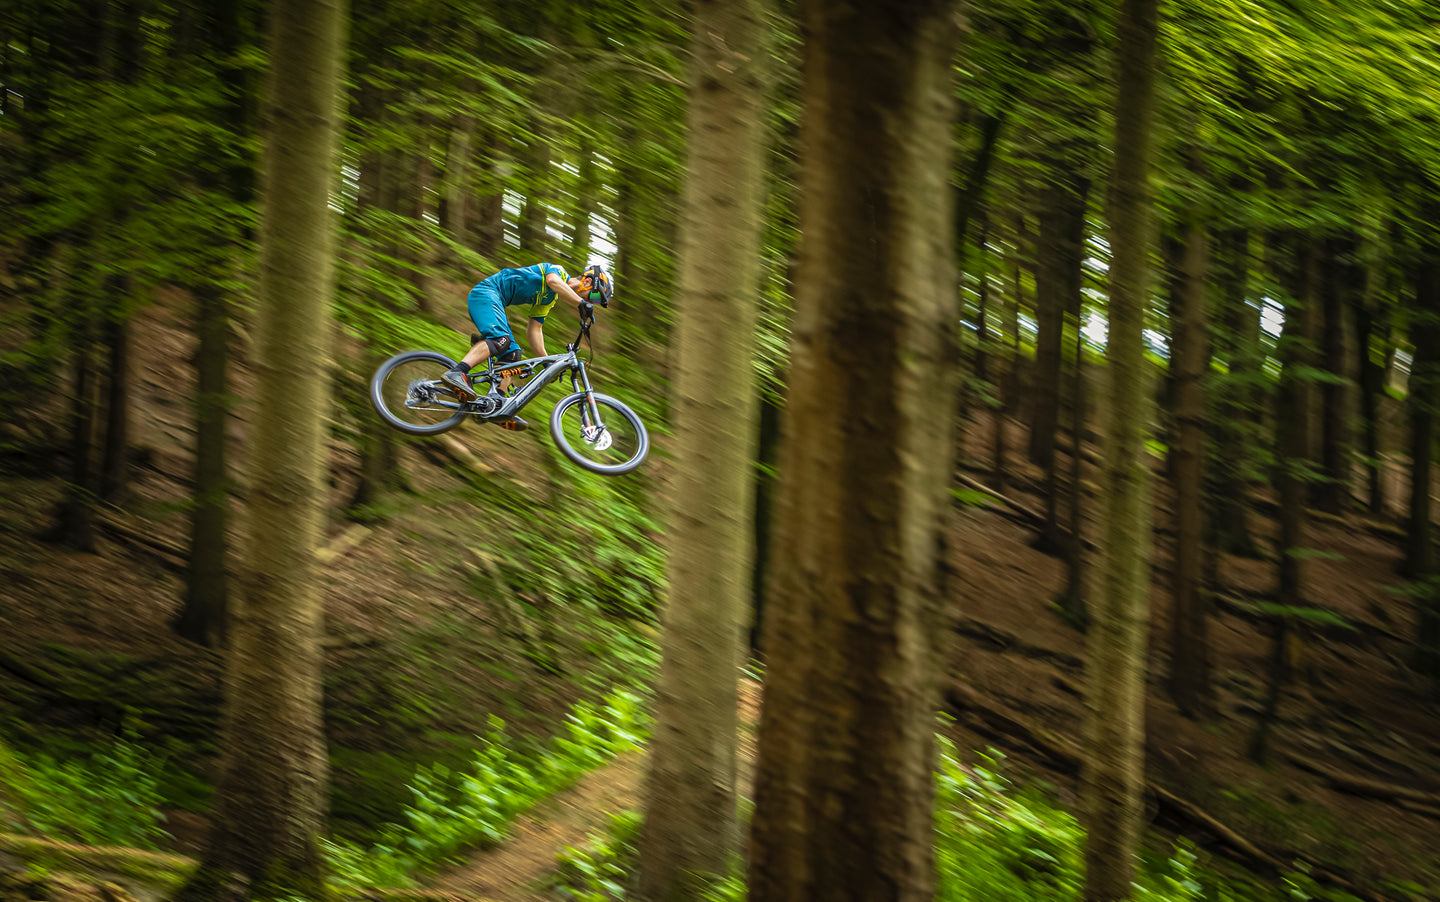 “The Whyte E-150, with the brand-new Bosch 4th generation motor, and the lowest centre of gravity in the e-mountain bike world, the best handling e-bike anyone has ever made”